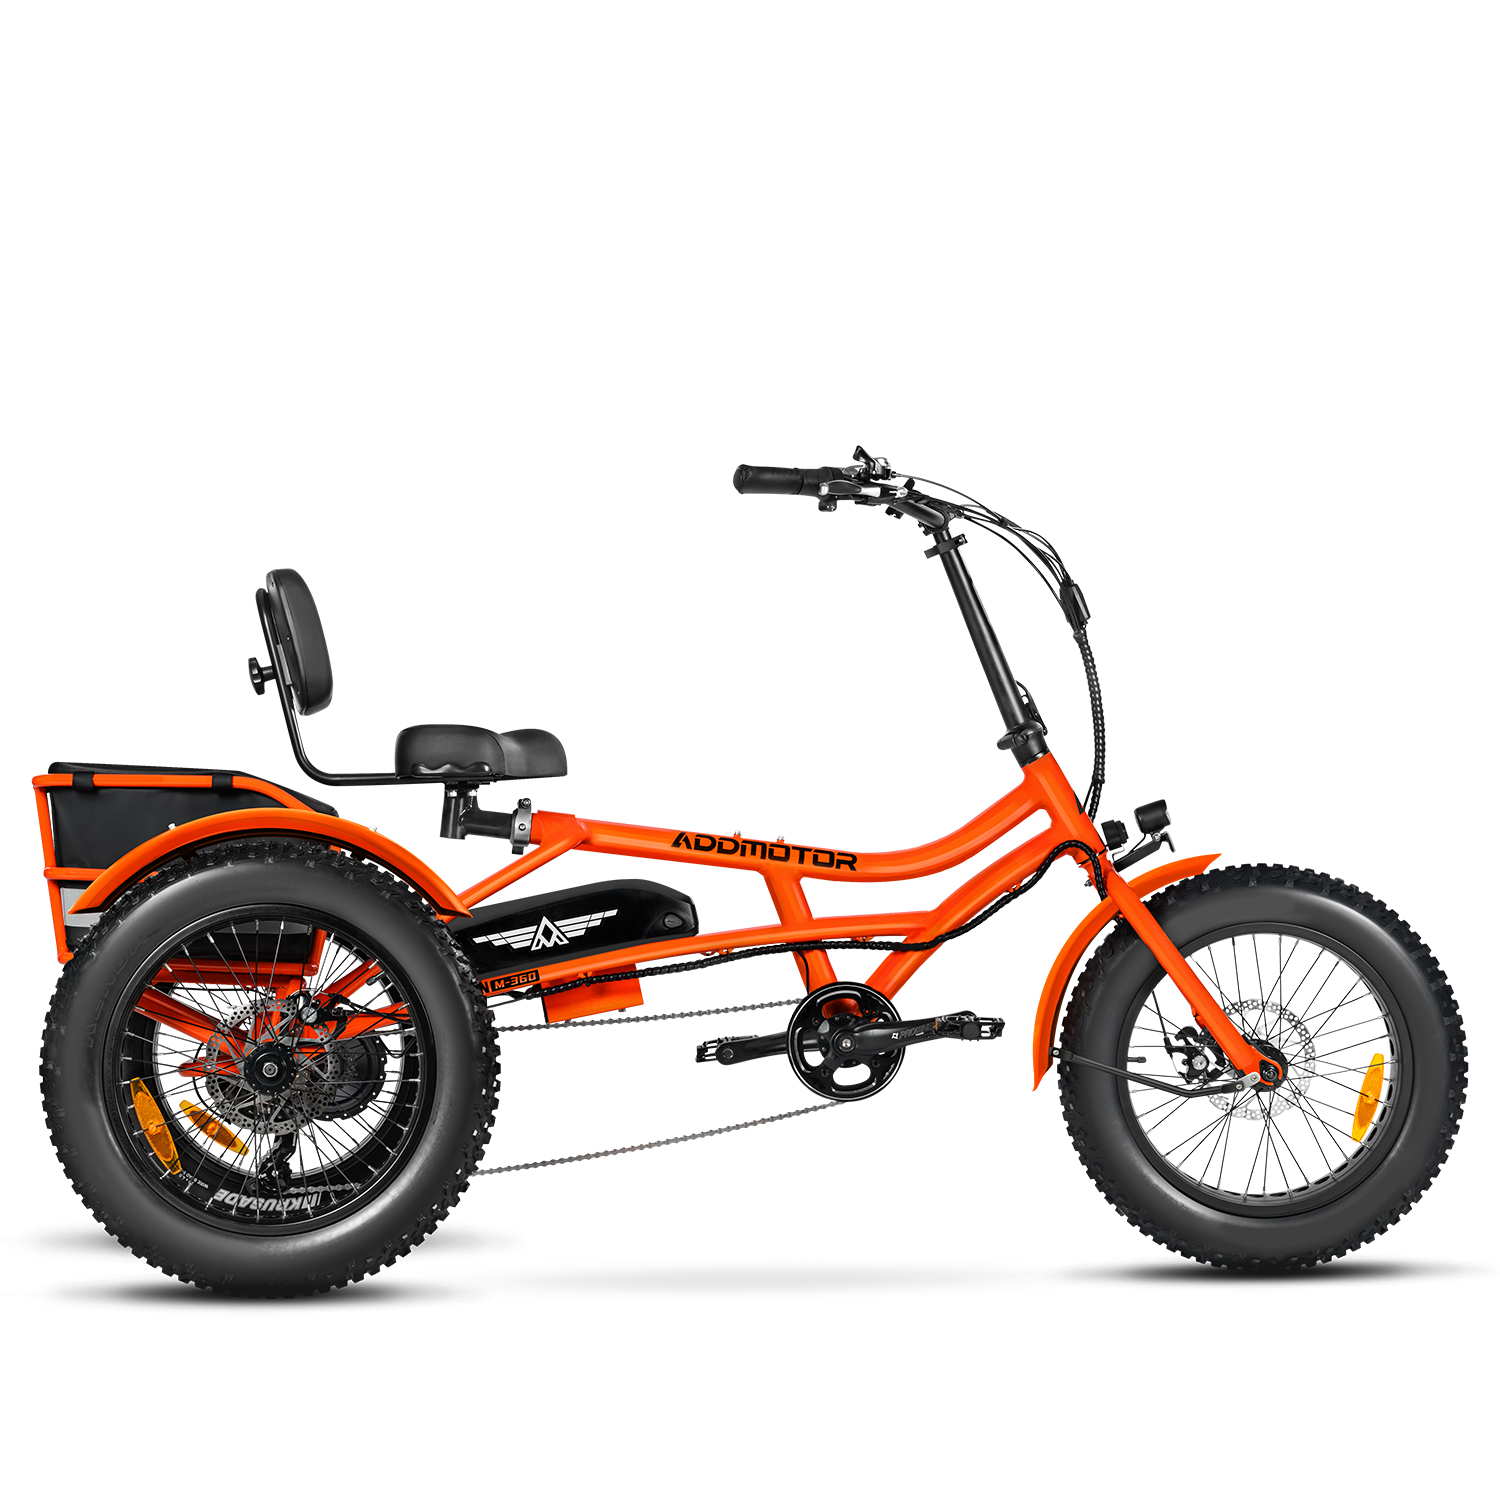 Addmotor Arisetan M-360 | Adult Semi-recumbent Electric Tricycle | Best Affordable Electric Trike with 750W Bafang Rear-Mounted Motor | Orange